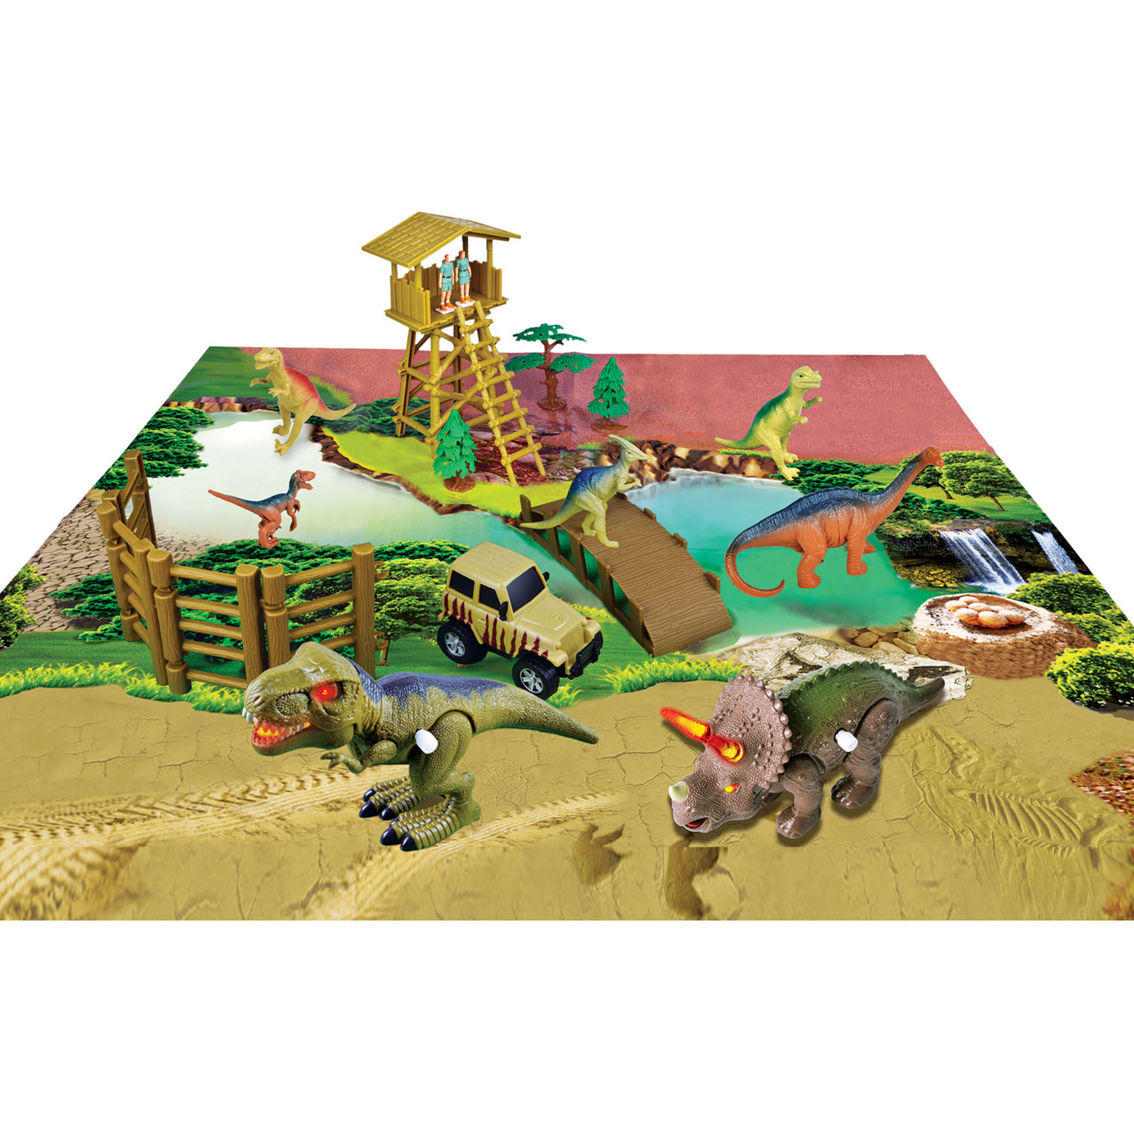 Red Box Toy Dinosaur Park with Light and Sound T Rex and Triceratops - Image 3 of 5